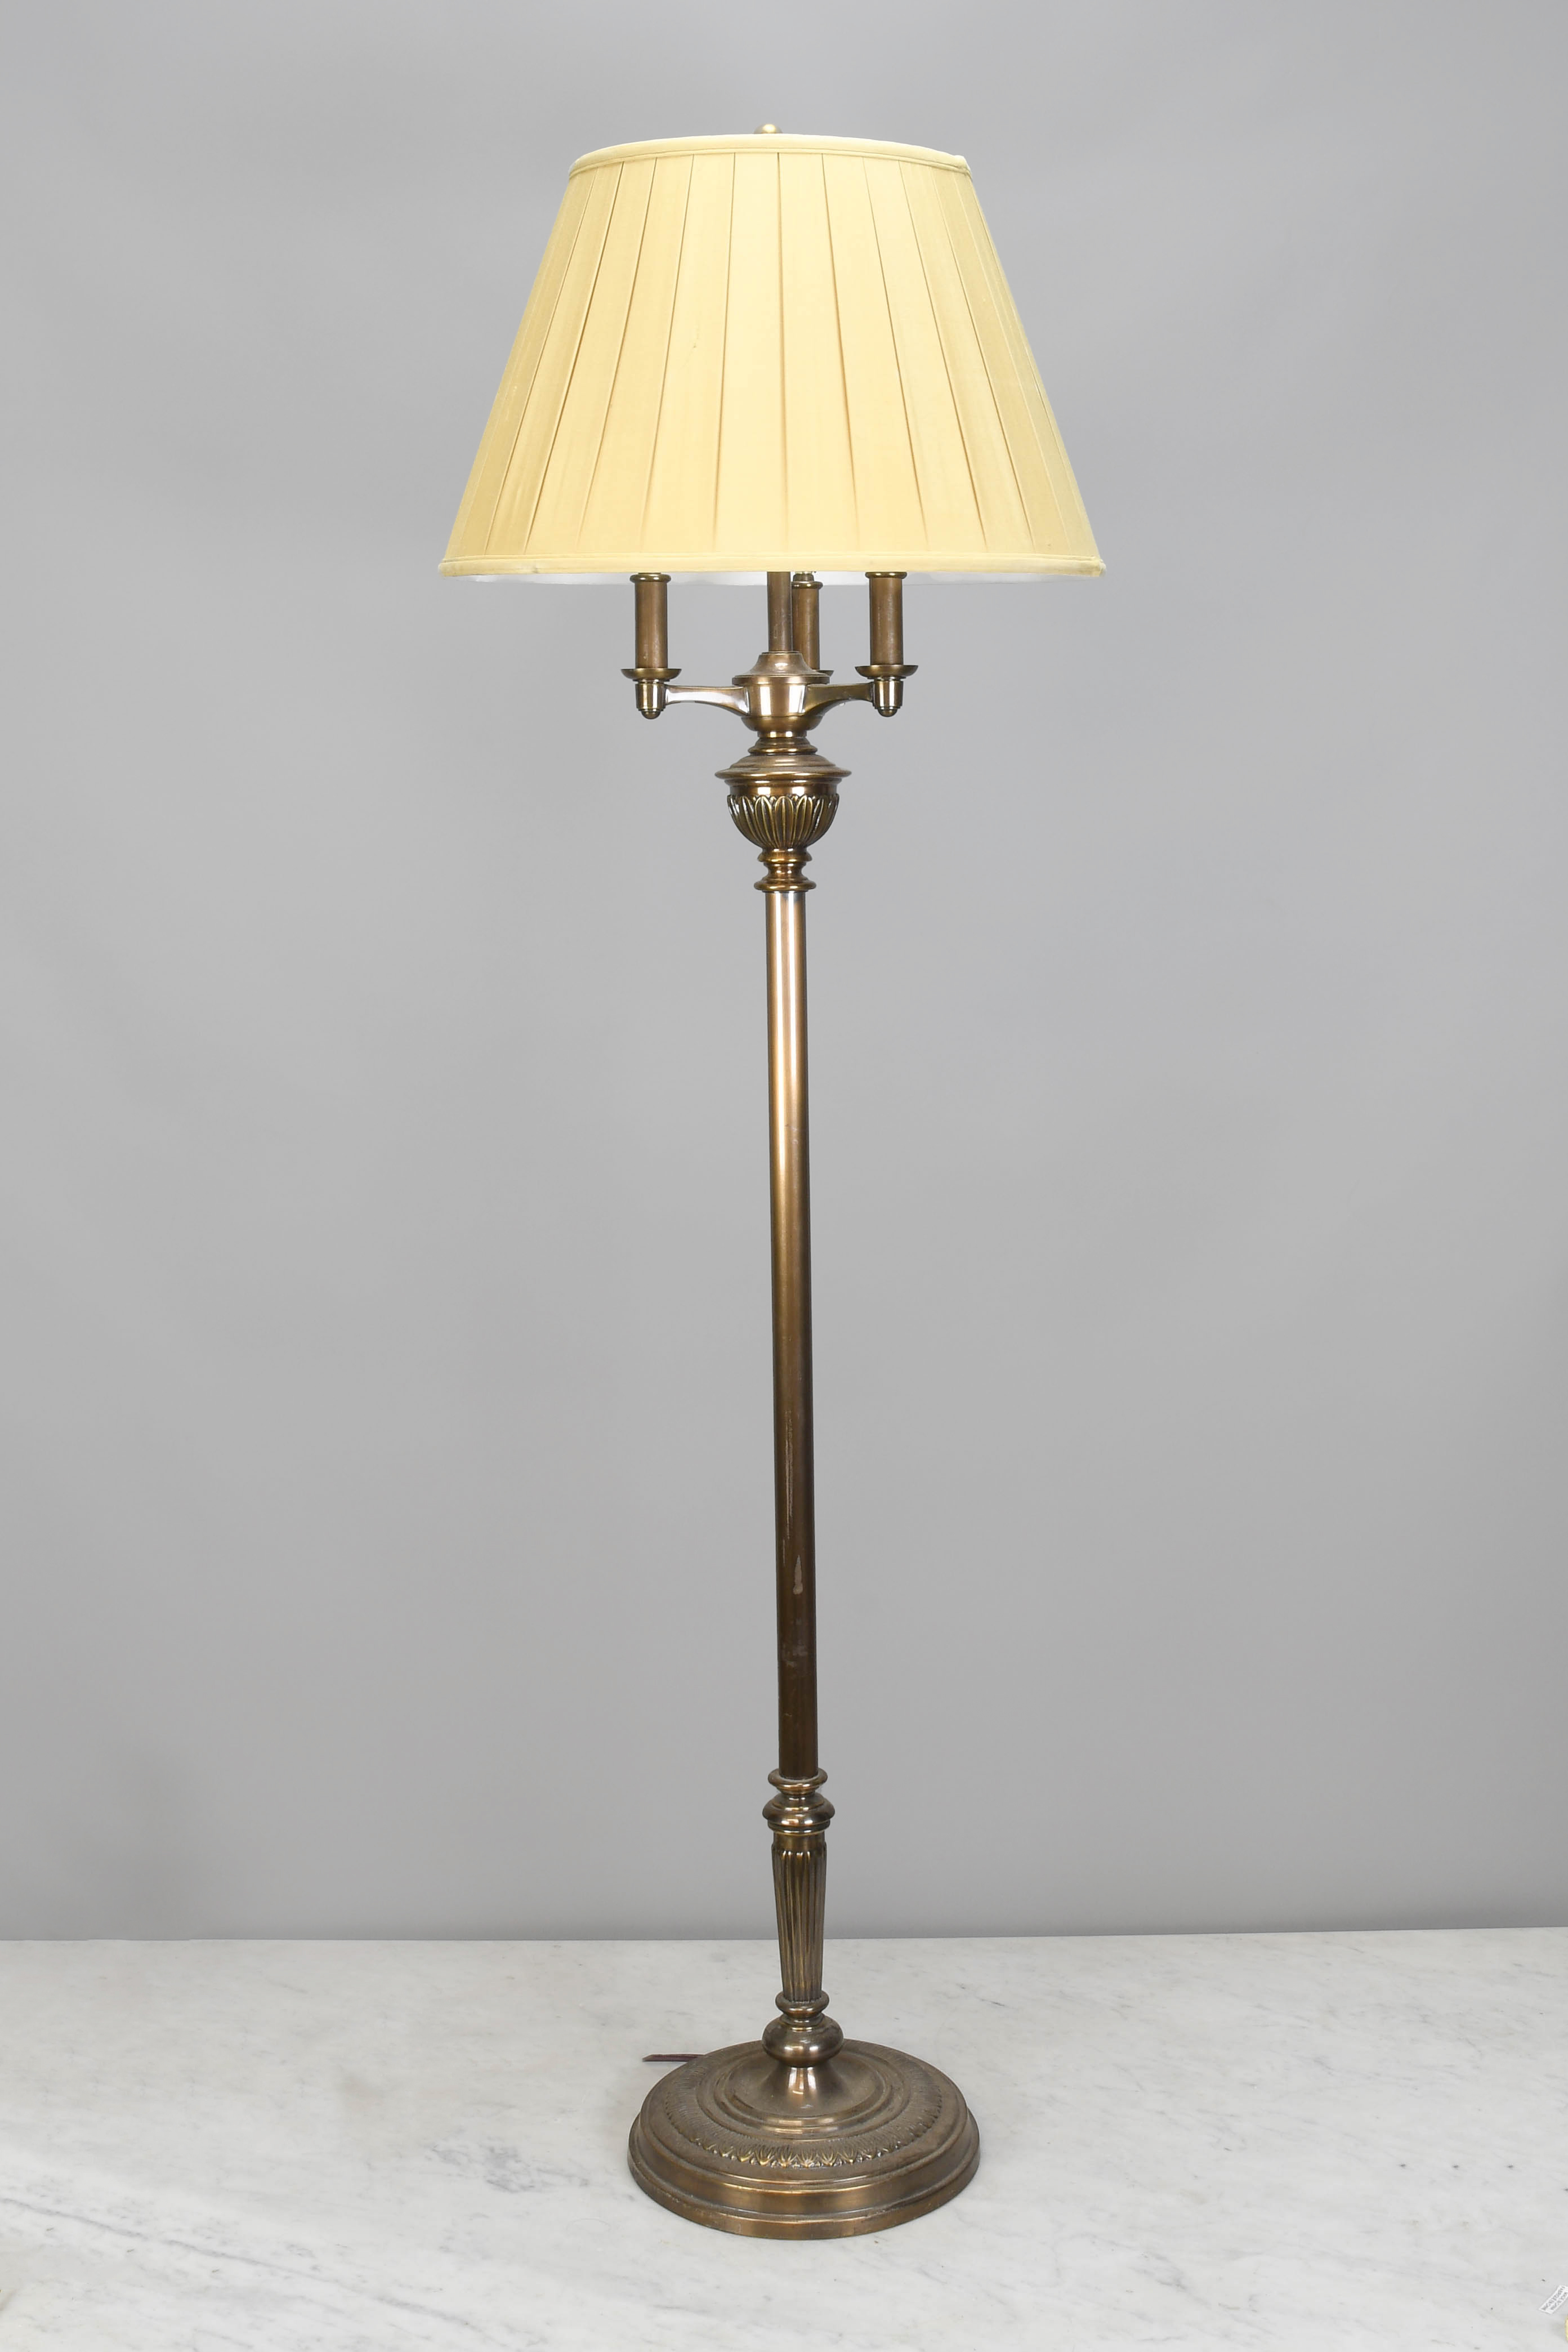 Three Candle Antique Brass Floor Lamp, Floor Lamps, Collection, City  Knickerbocker